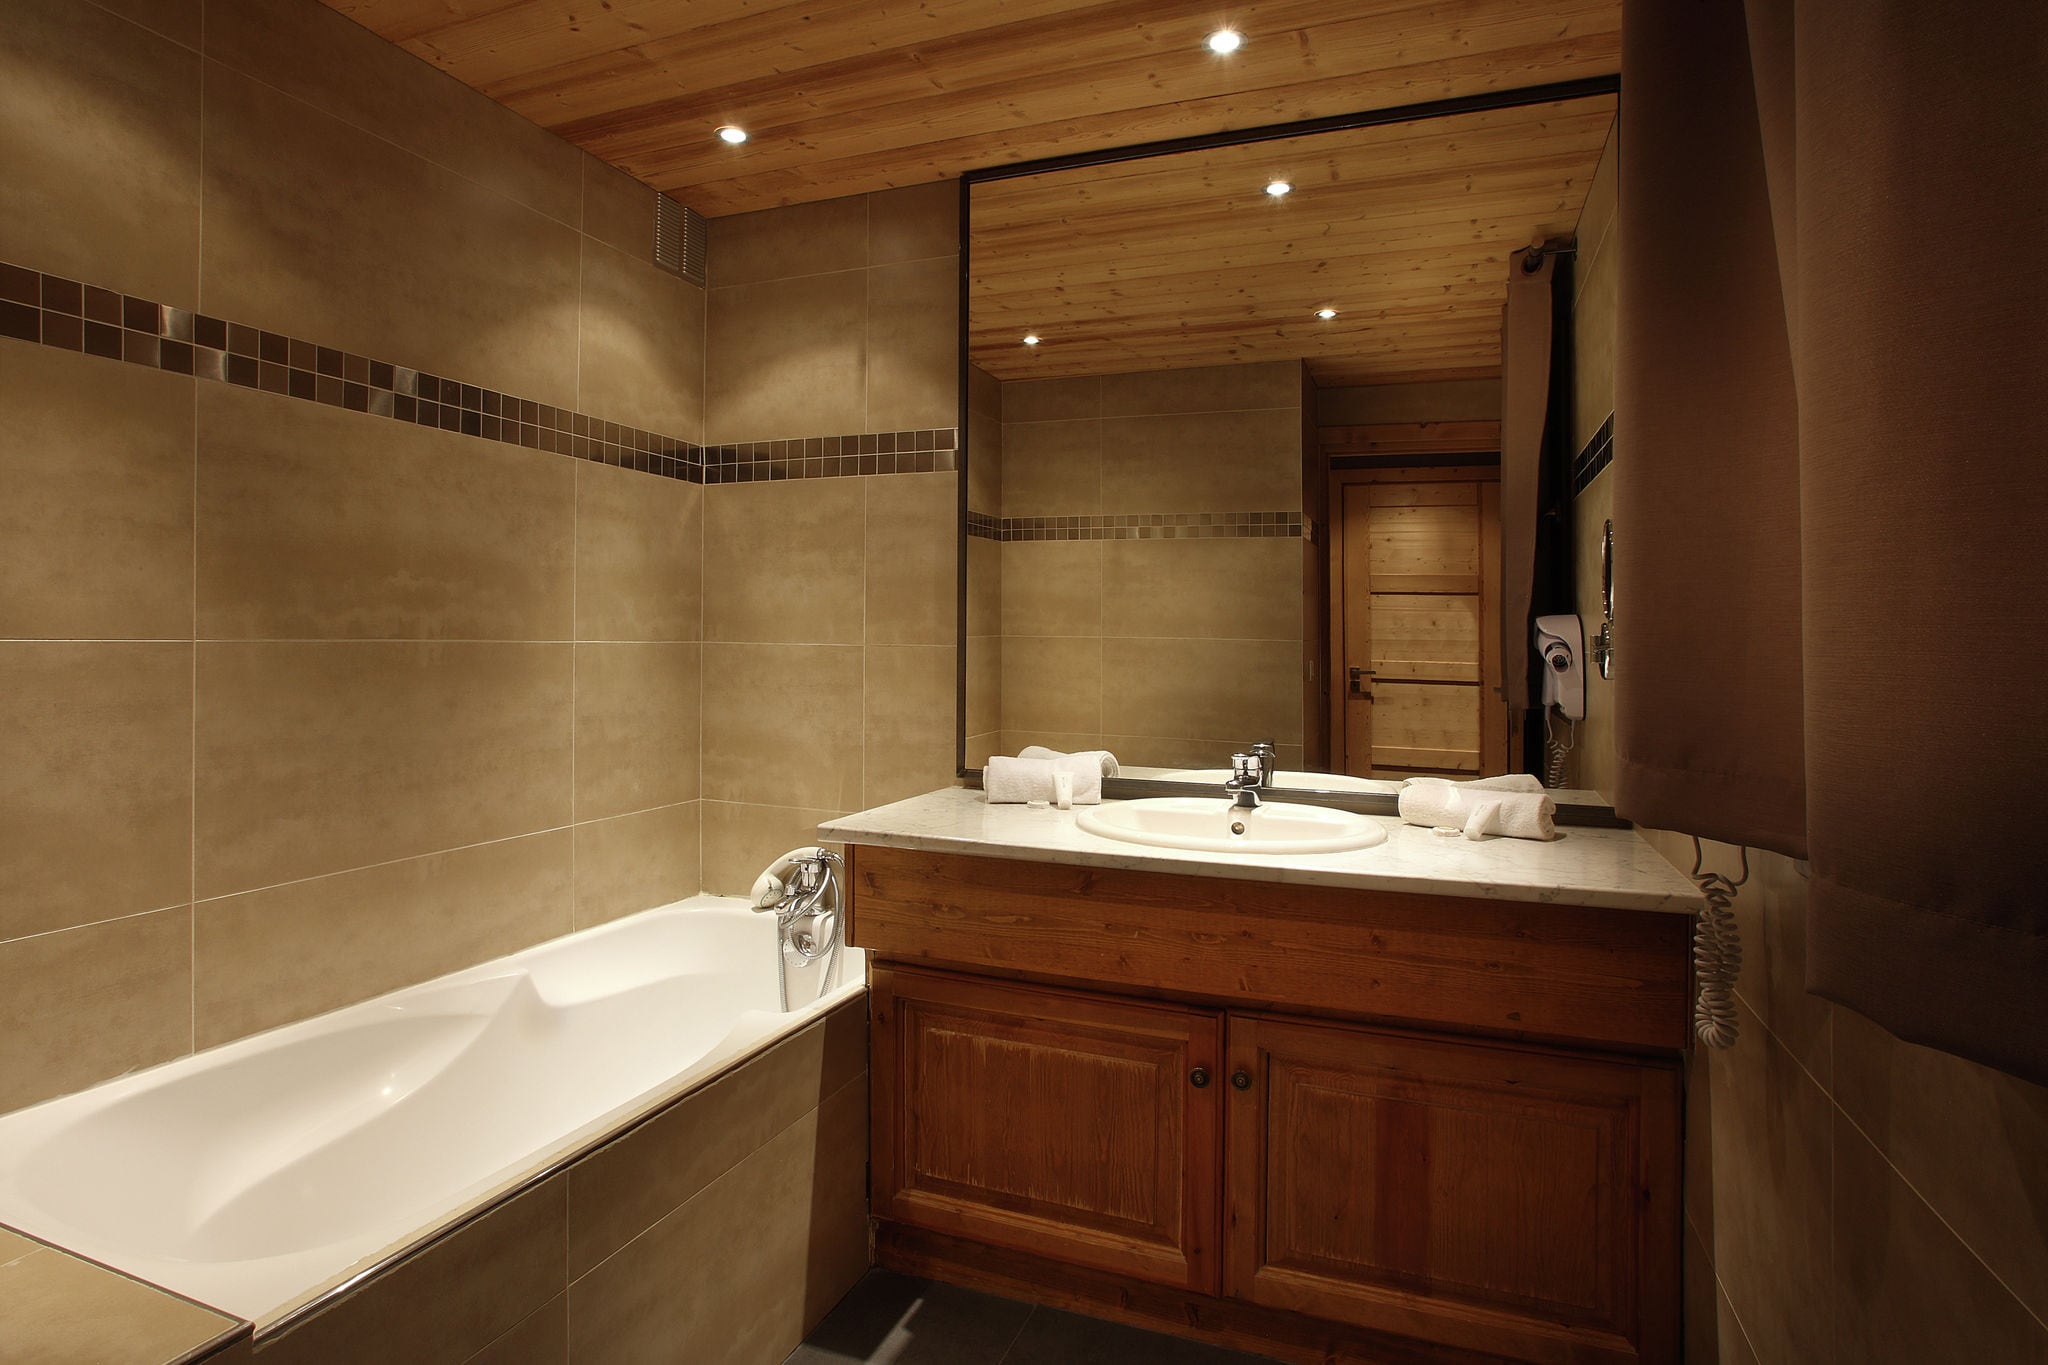 Luxury comfortable apartment on the slopes near Val Thorens